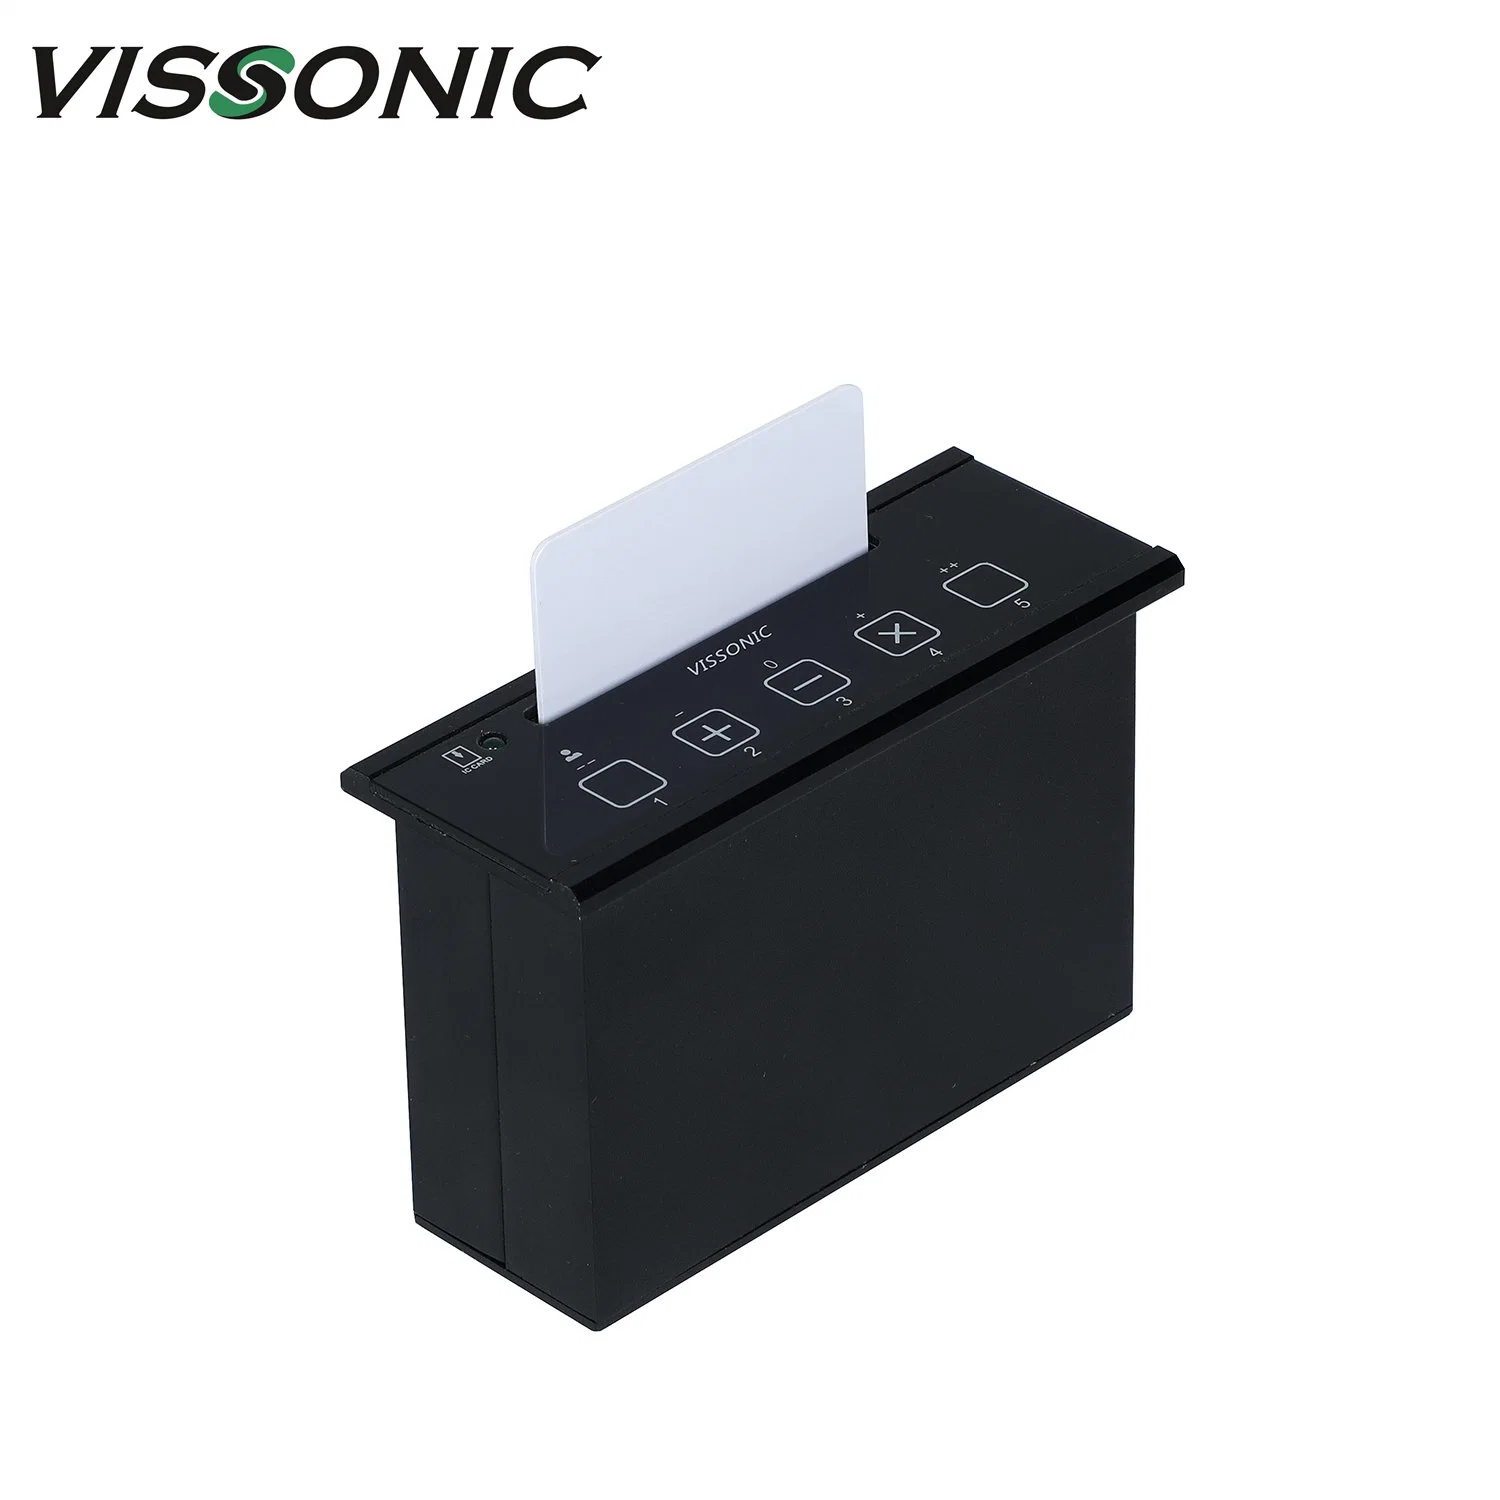 Vissonic Wired Conference System Digital Flush Mount Voting Unit with IC-Card Reader